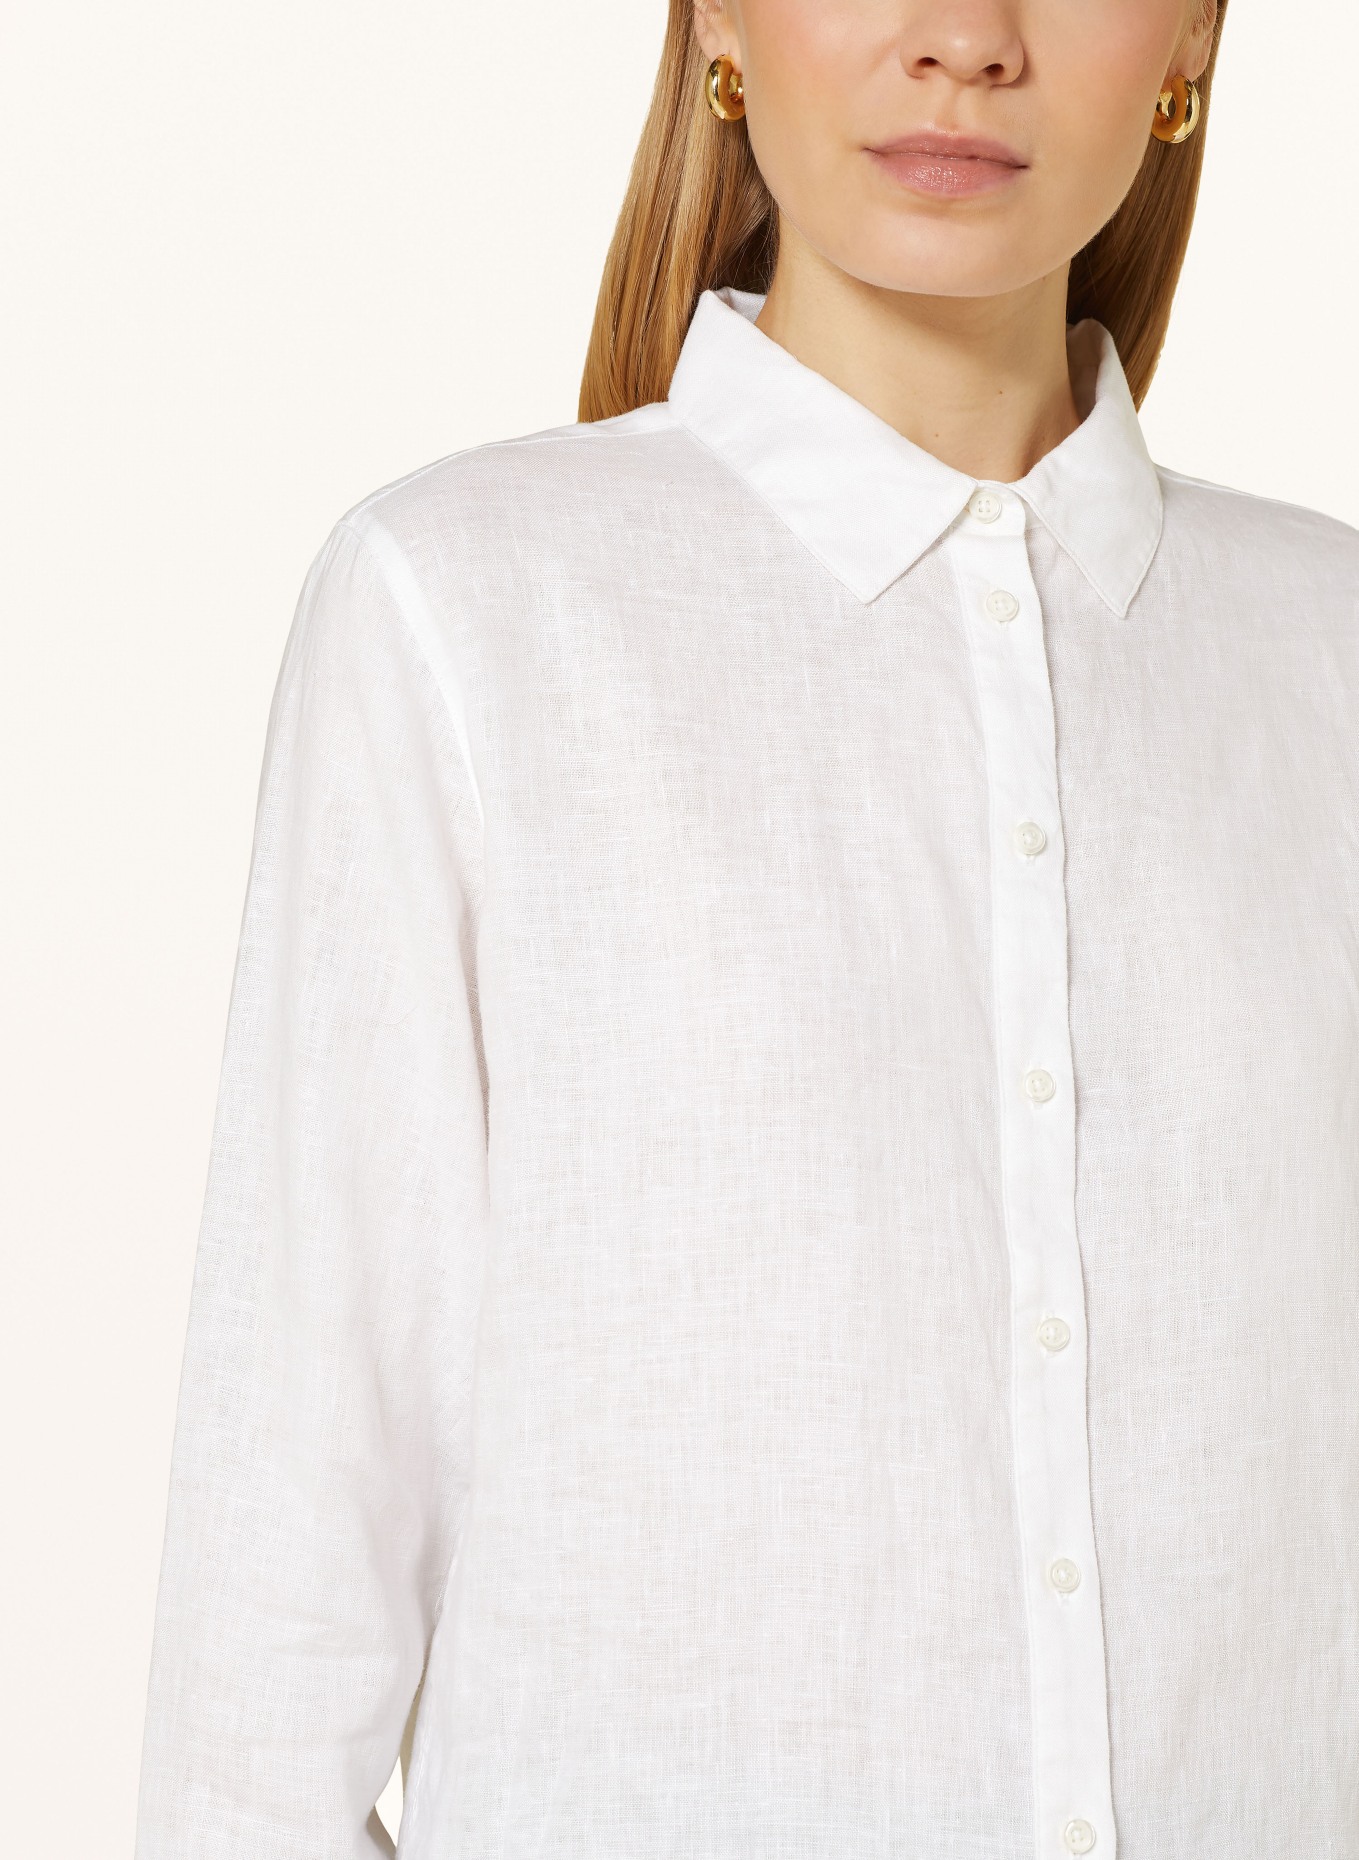 FYNCH-HATTON Shirt blouse made of linen, Color: WHITE (Image 4)